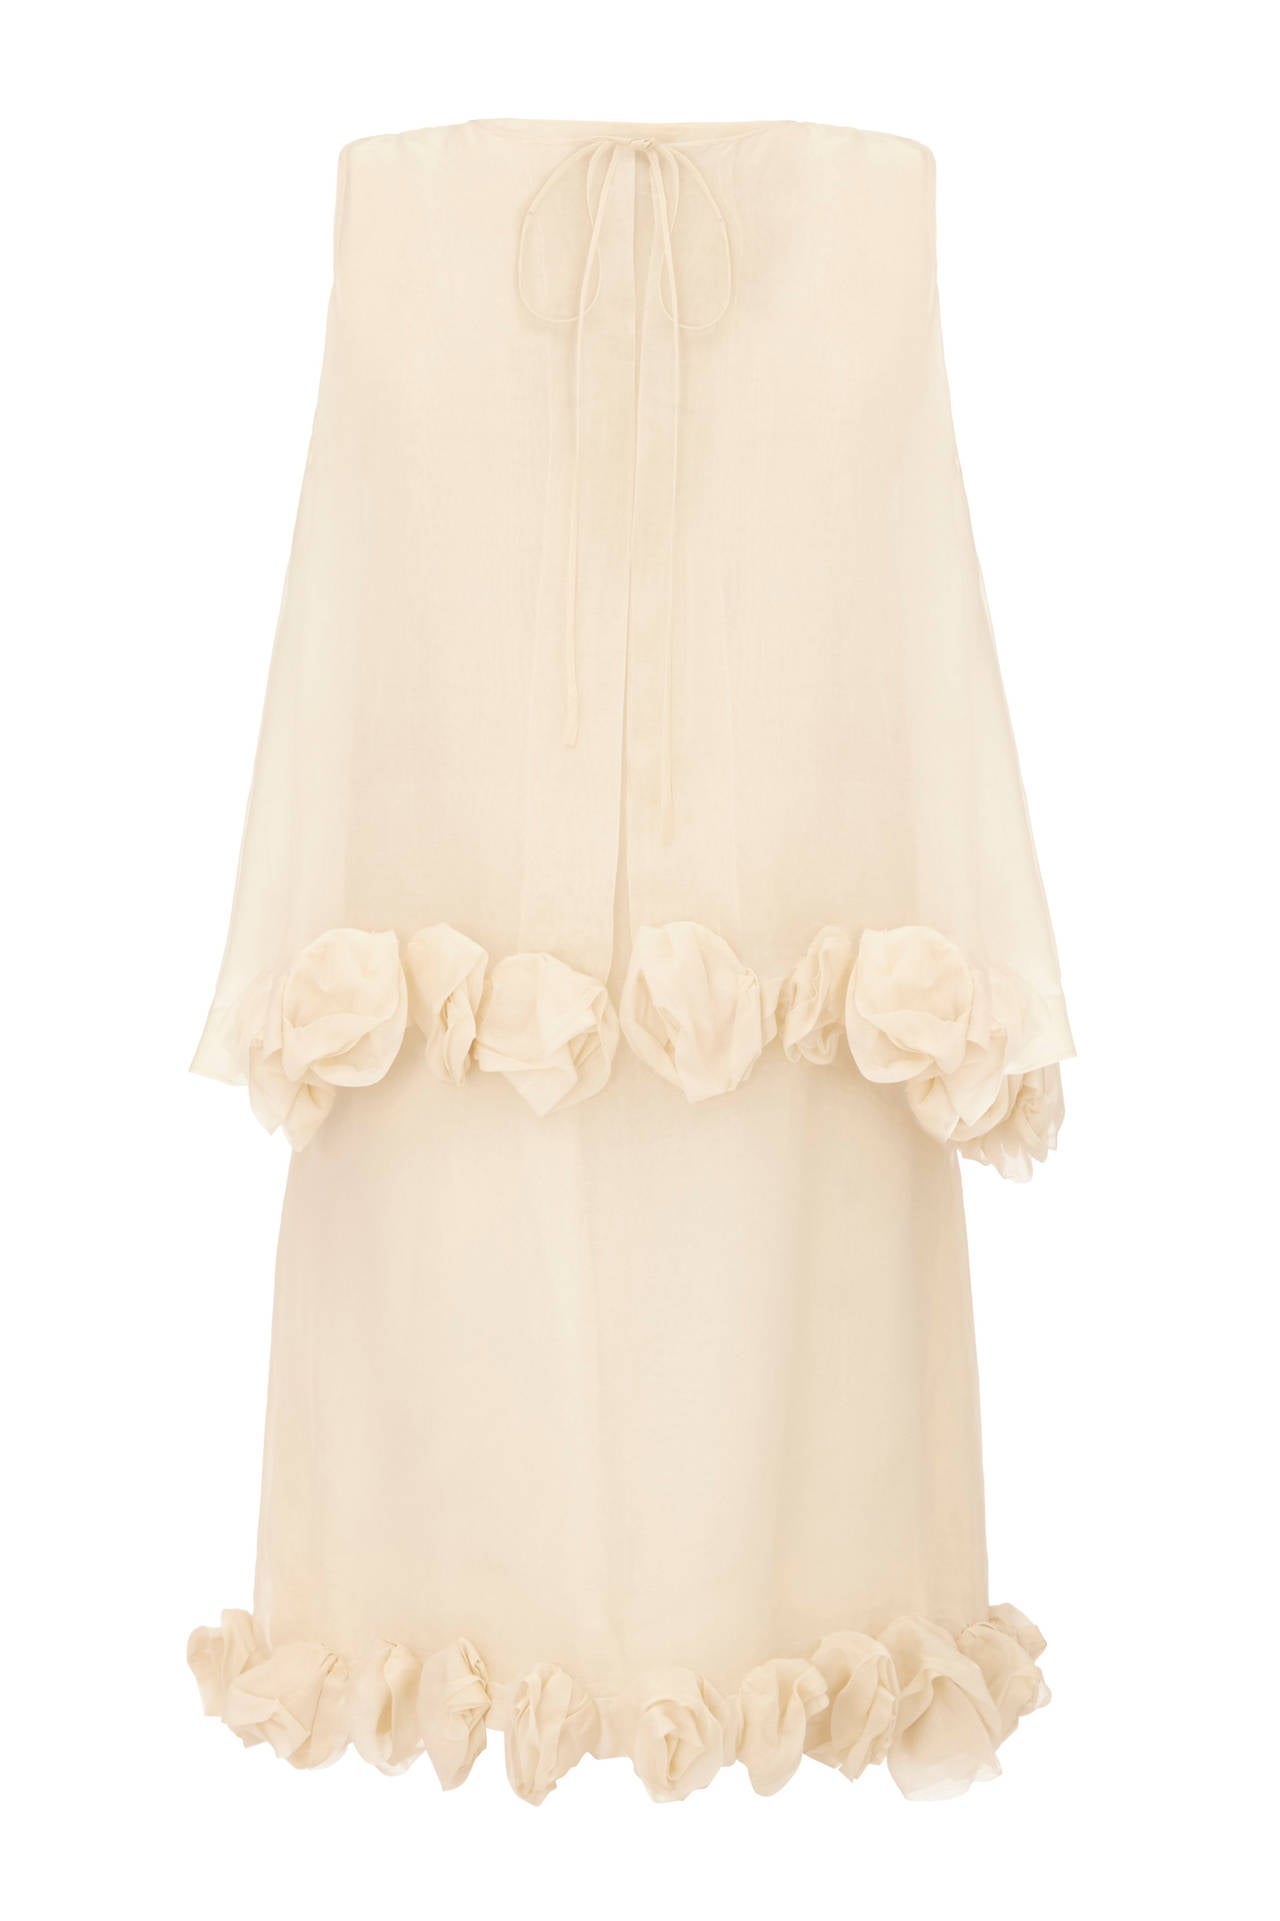 Sensational ivory silk organza dress and sleeveless jacket set with sculptural 3D organza roses around the hems. This vintage 1960s piece by Christian Dior is couture made and would make a fantastic alternative bridal outfit. It is in very good to